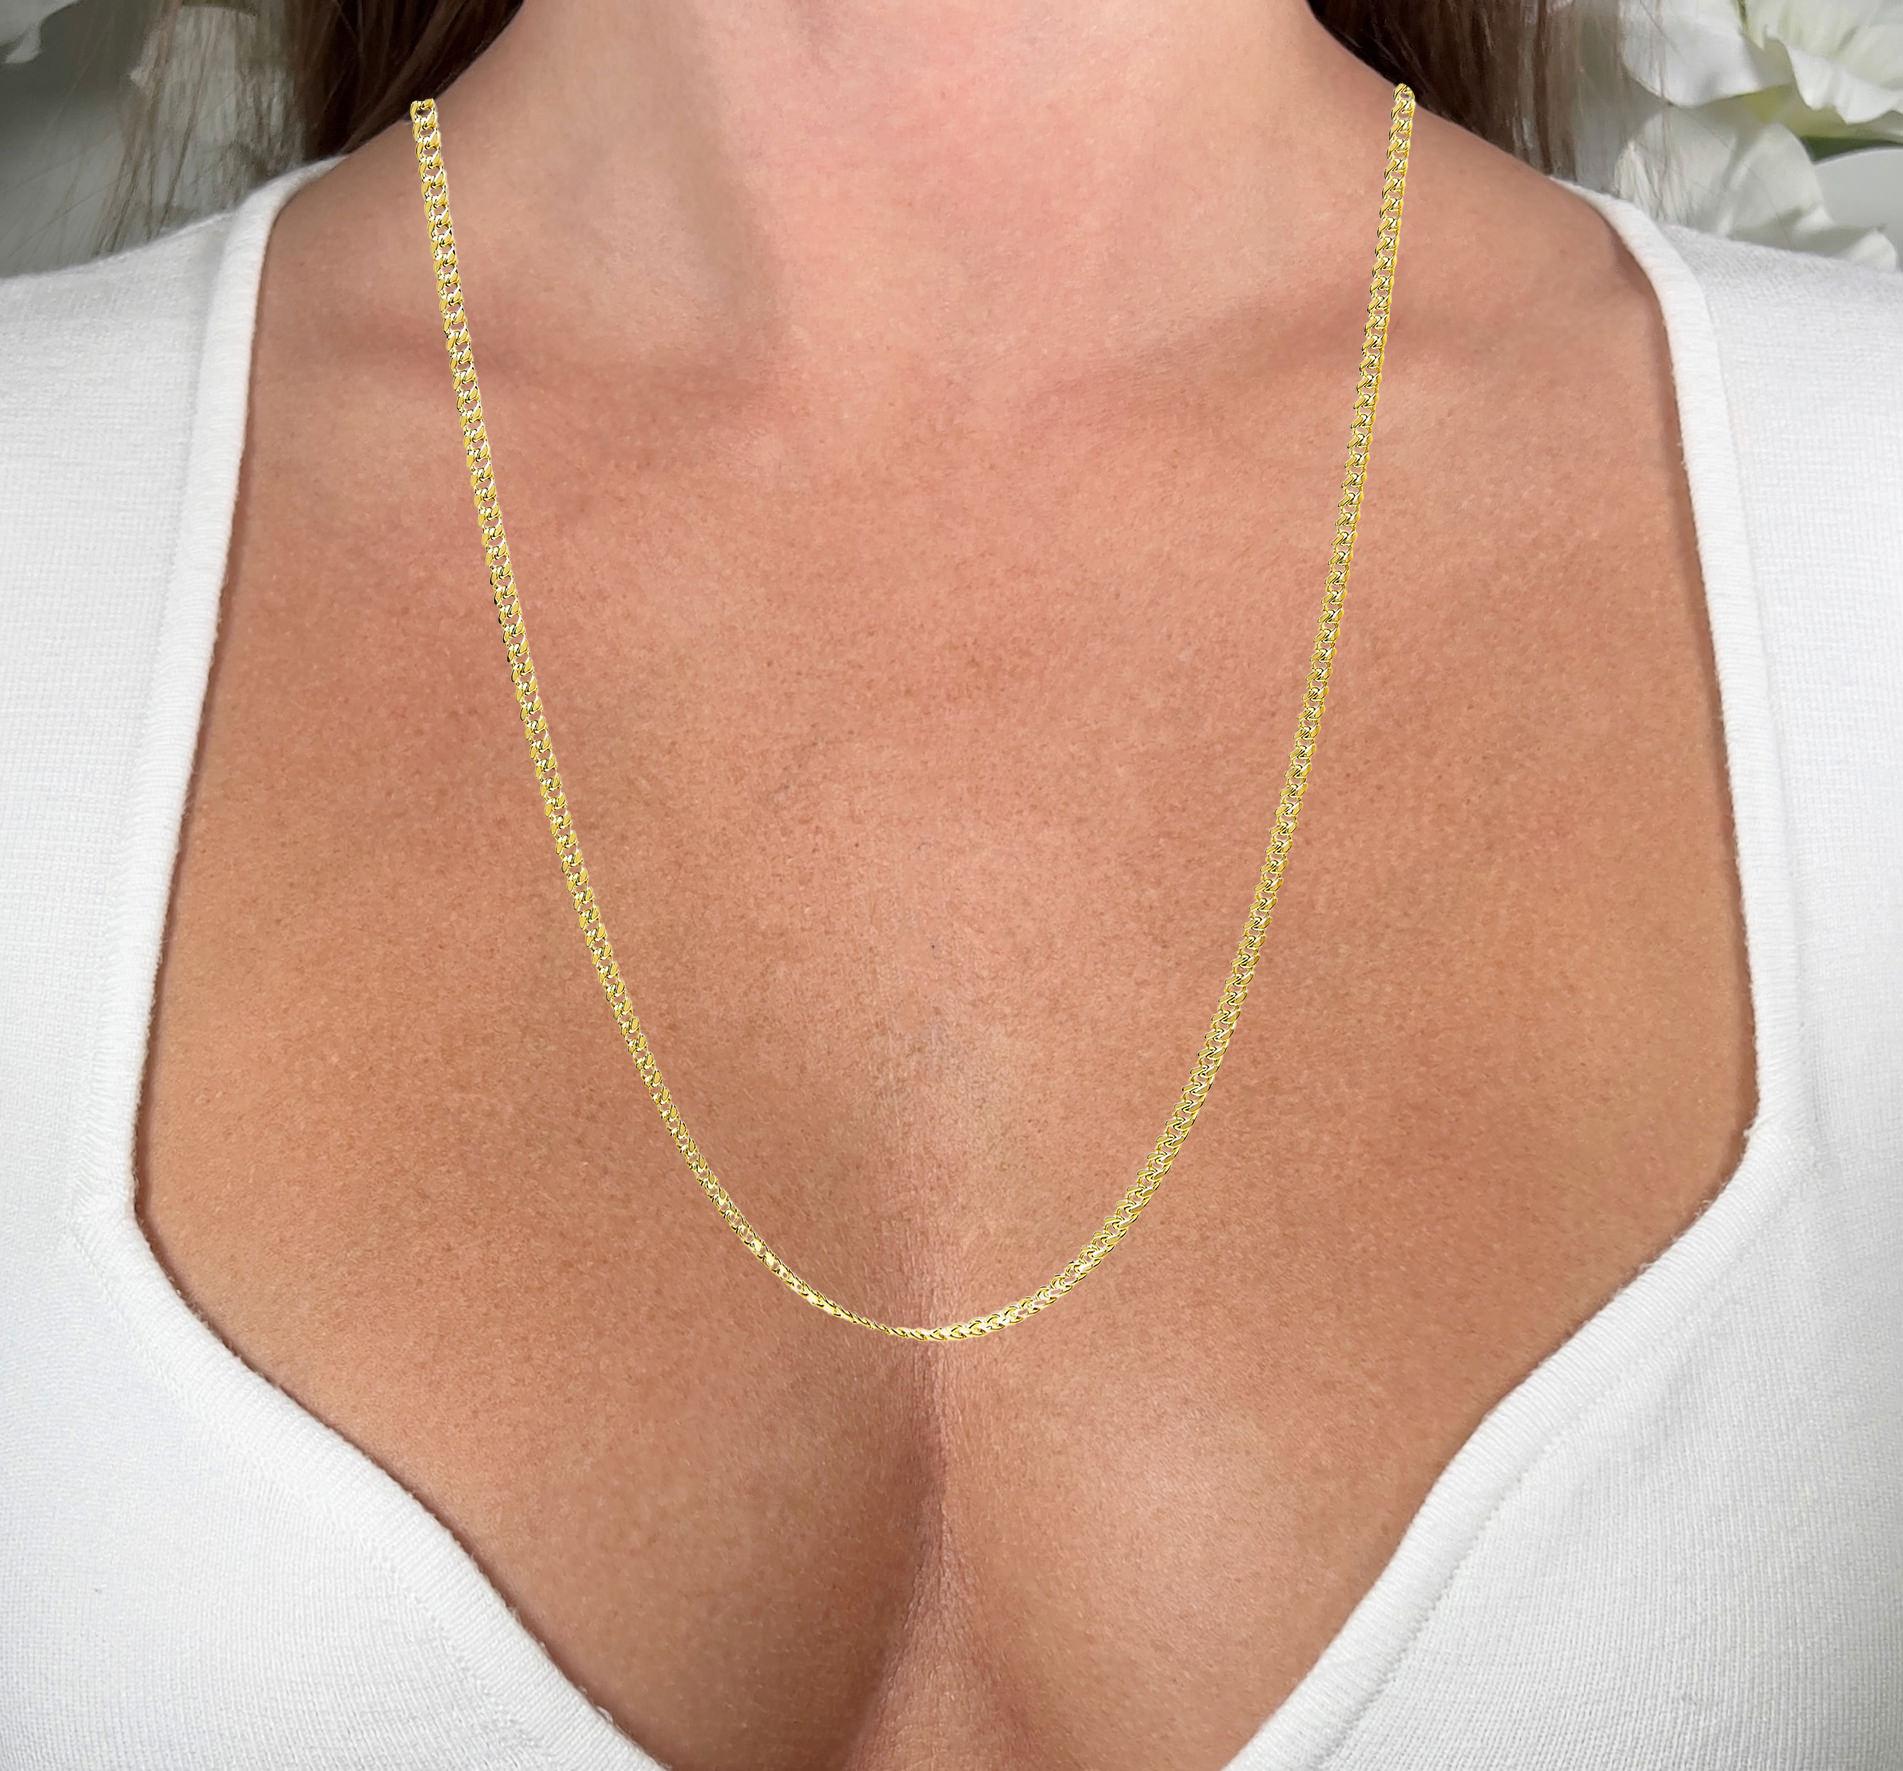 It comes with the Appraisal by GIA GG/AJP
Metal: 14K Yellow Gold
Length: 22 Inches
